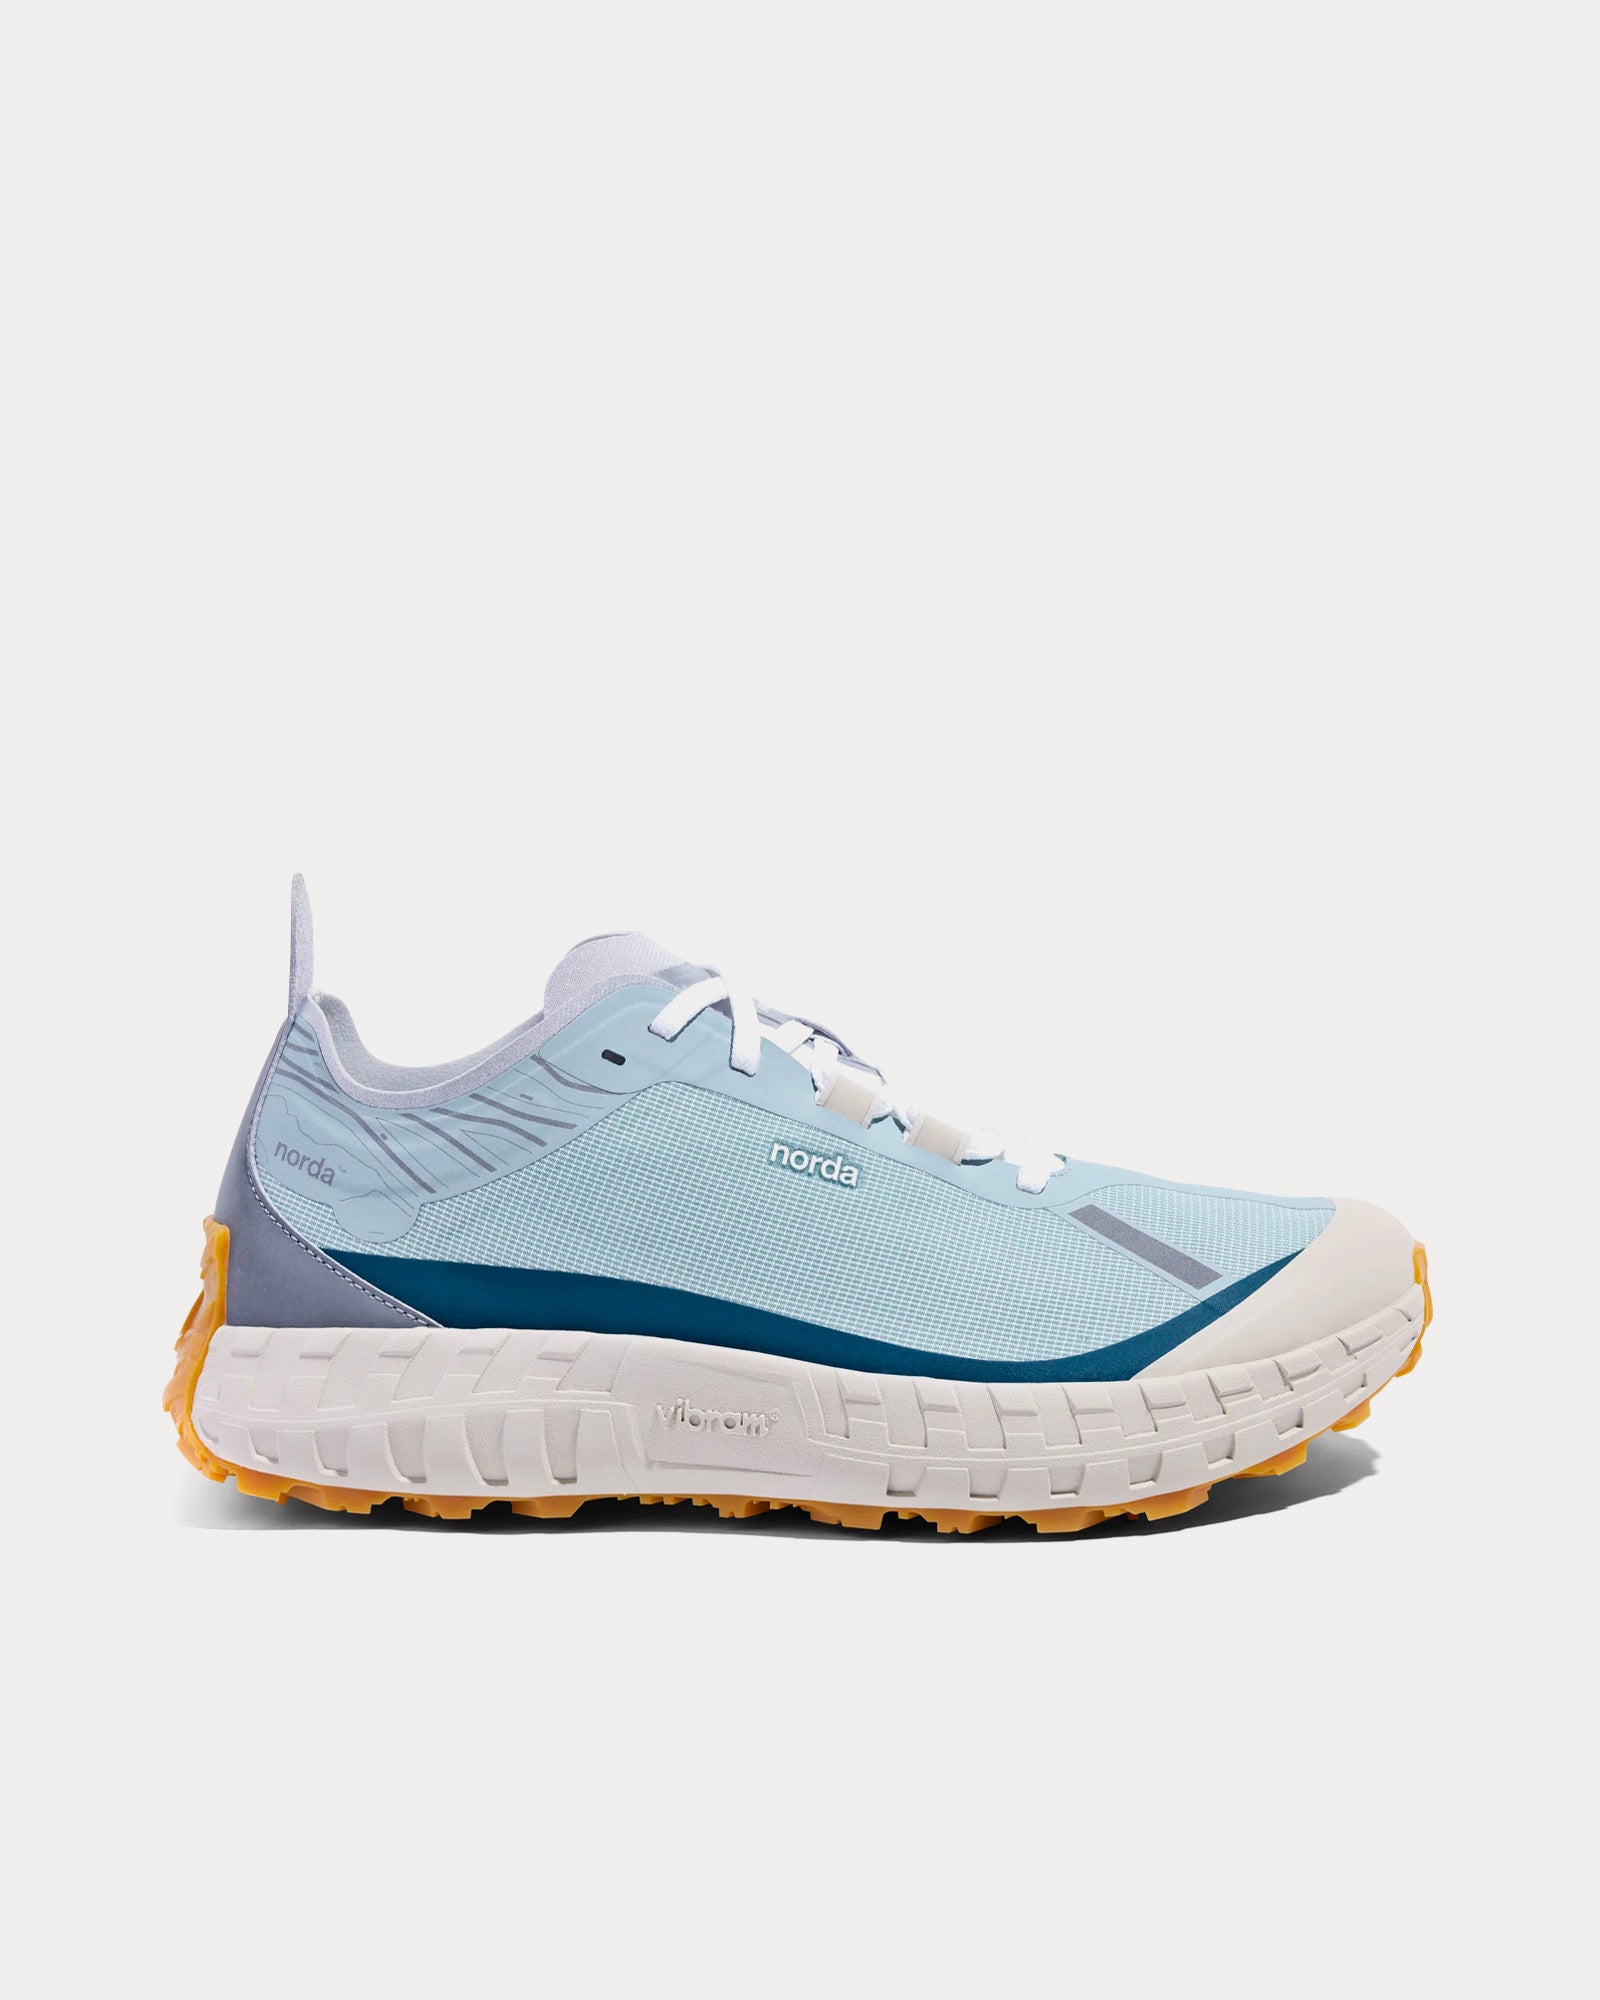 Norda - 001 W Ether Running Shoes